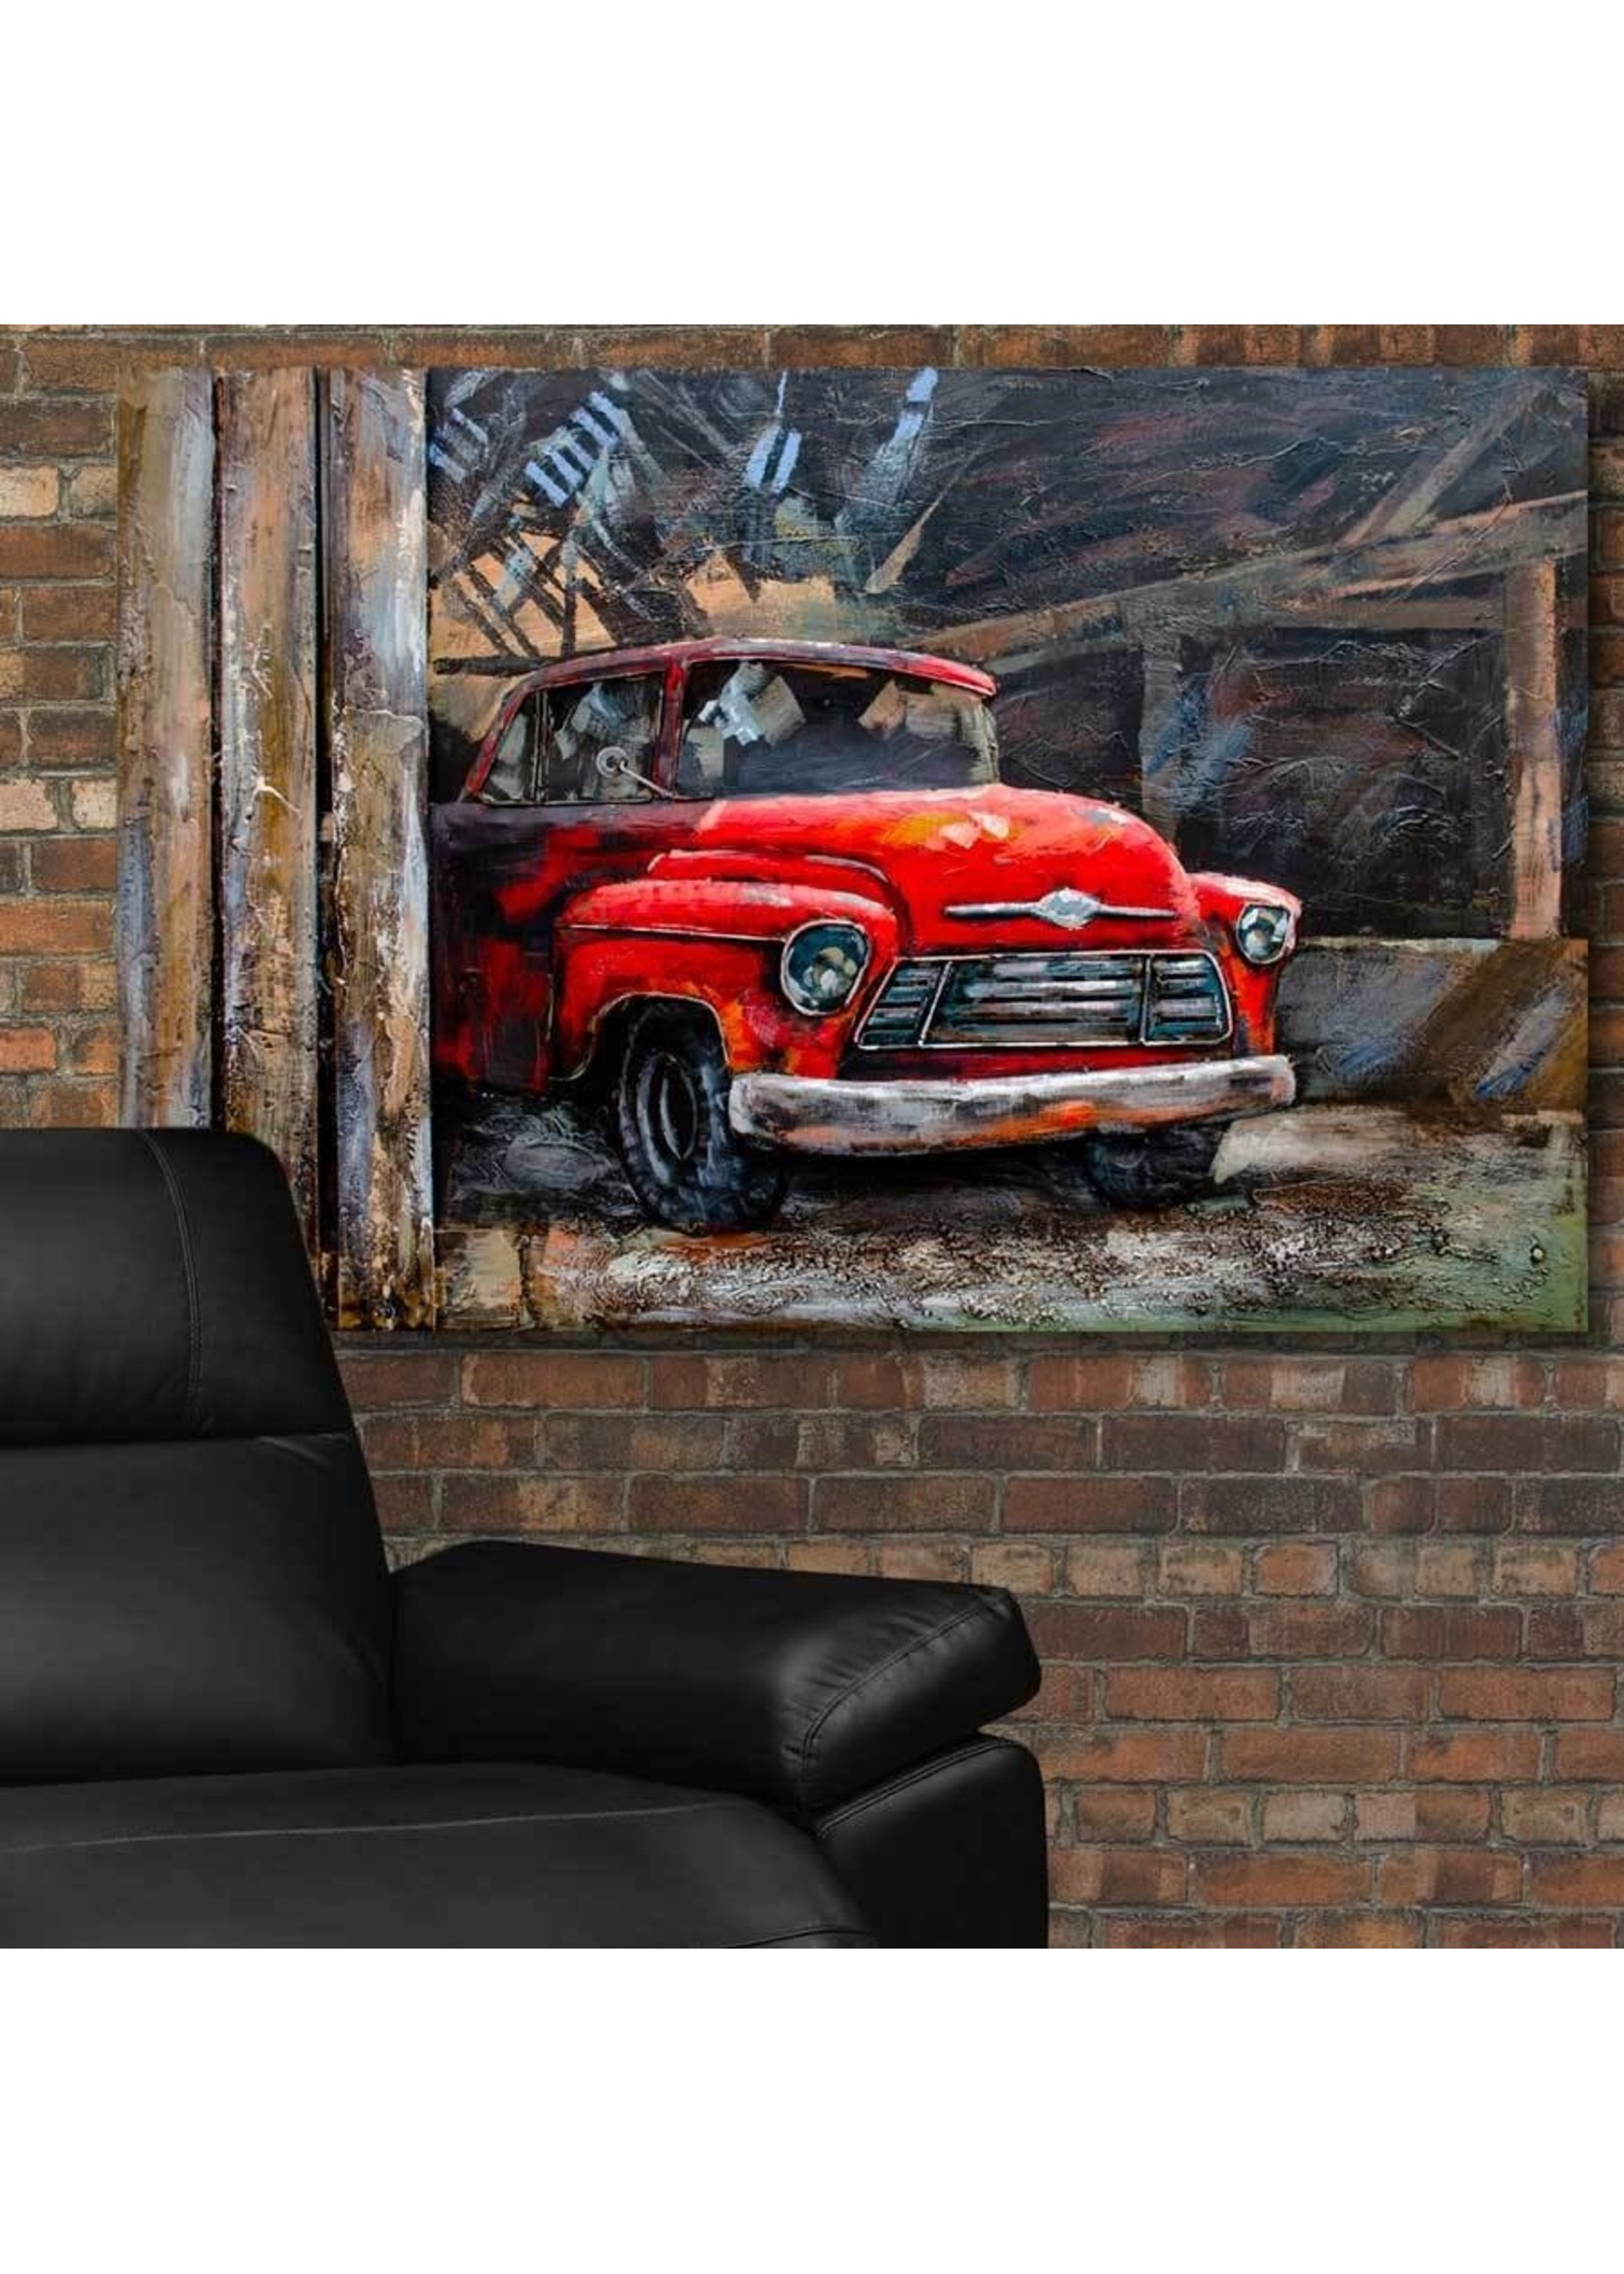 Panam Red Truck - 3D Metal Painting on Wood - SPT41643 -47"x31.5"